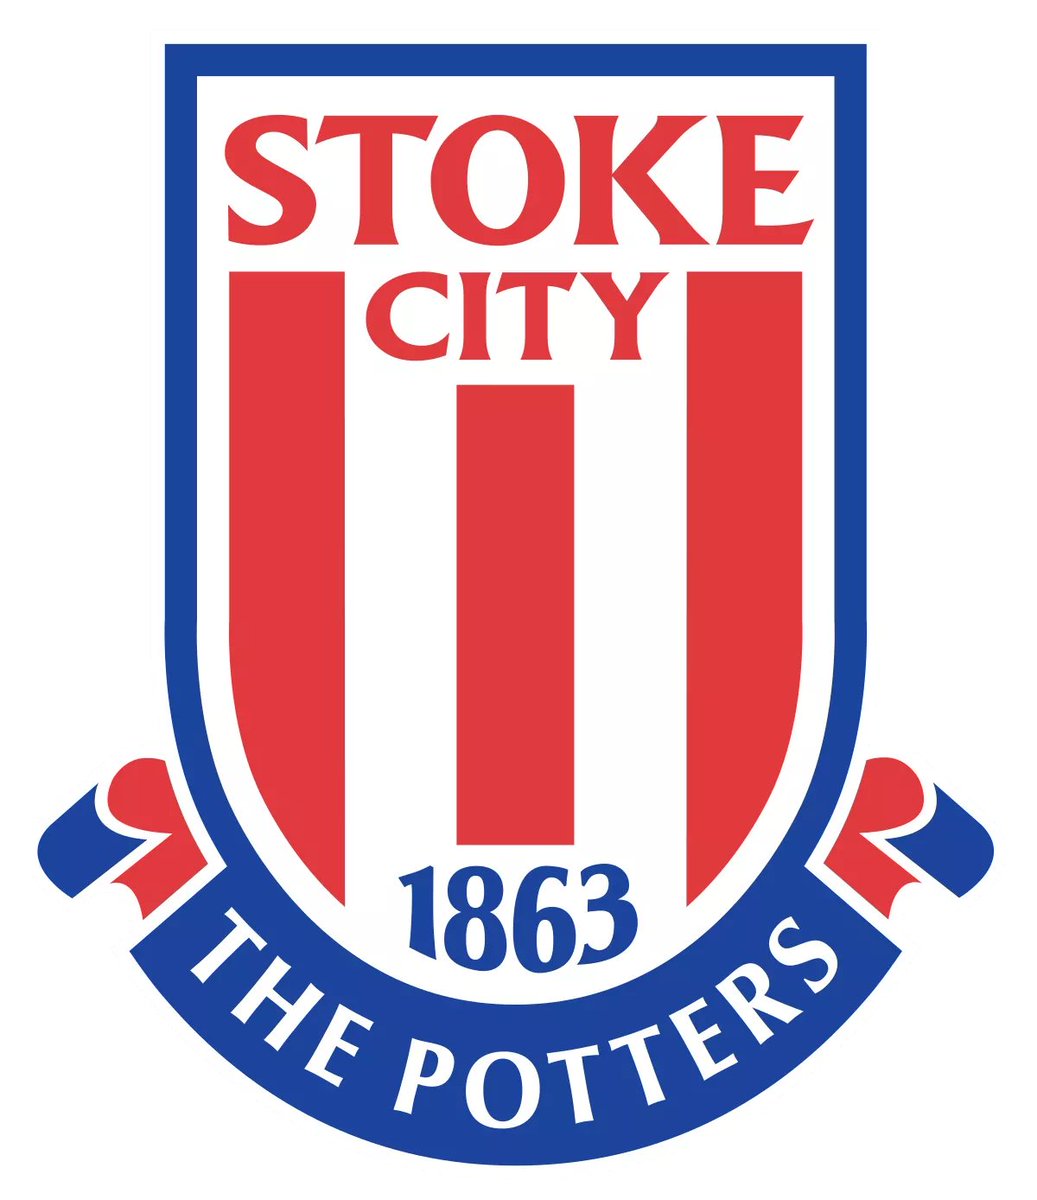 50) Stoke City Points: 128Manager: John Askey Stoke have some nice hot prospects- Morgan Gibbs White, Ben Brereton etc. Not especially useful though considering this is a one year simulation.